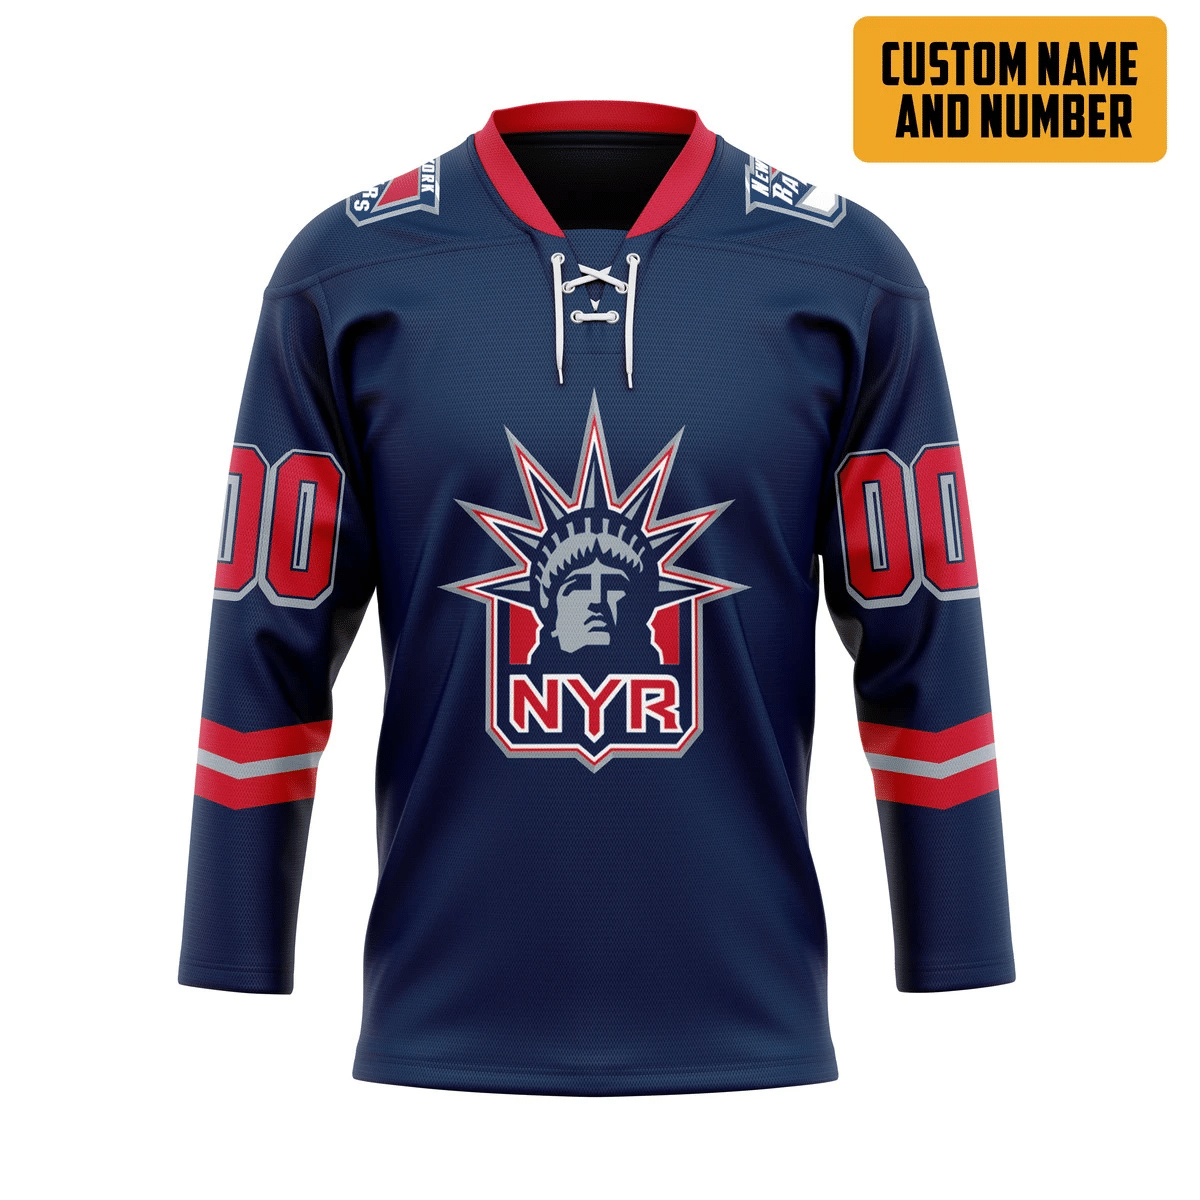 Top cool Hockey jersey for fan You can buy online. 20